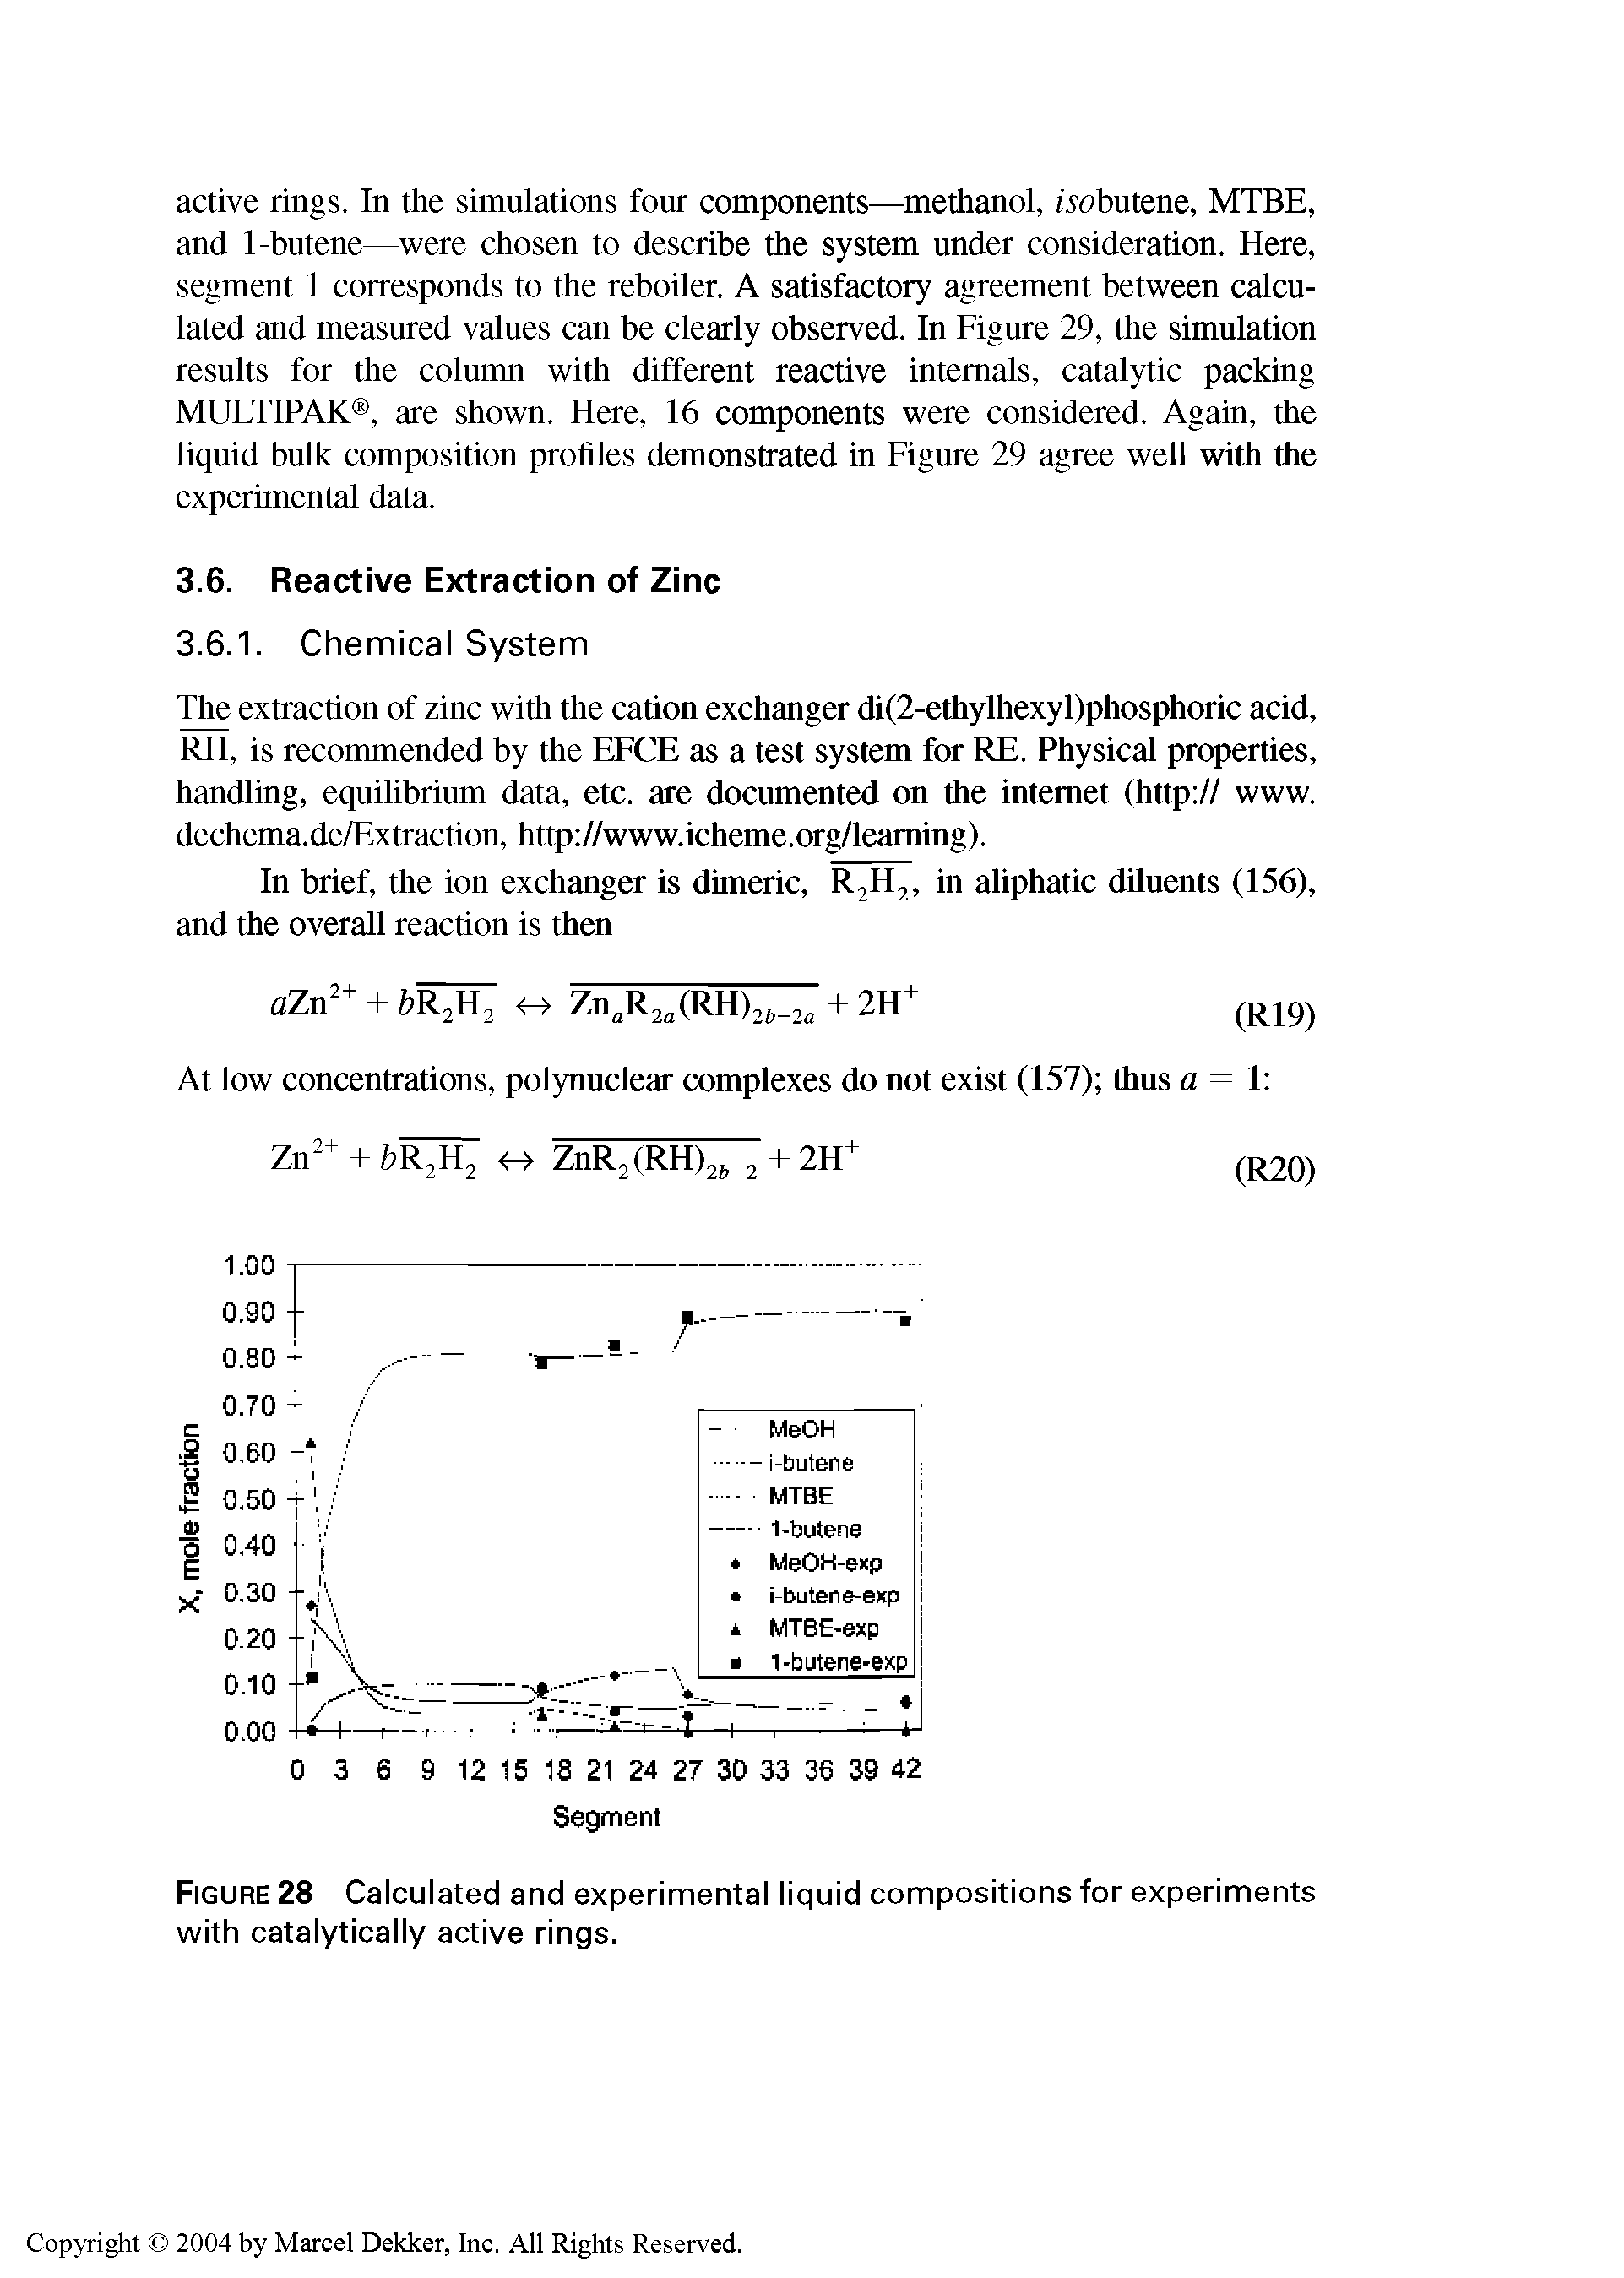 Figure 28 Calculated and experimental liquid compositions for experiments with catalytically active rings.